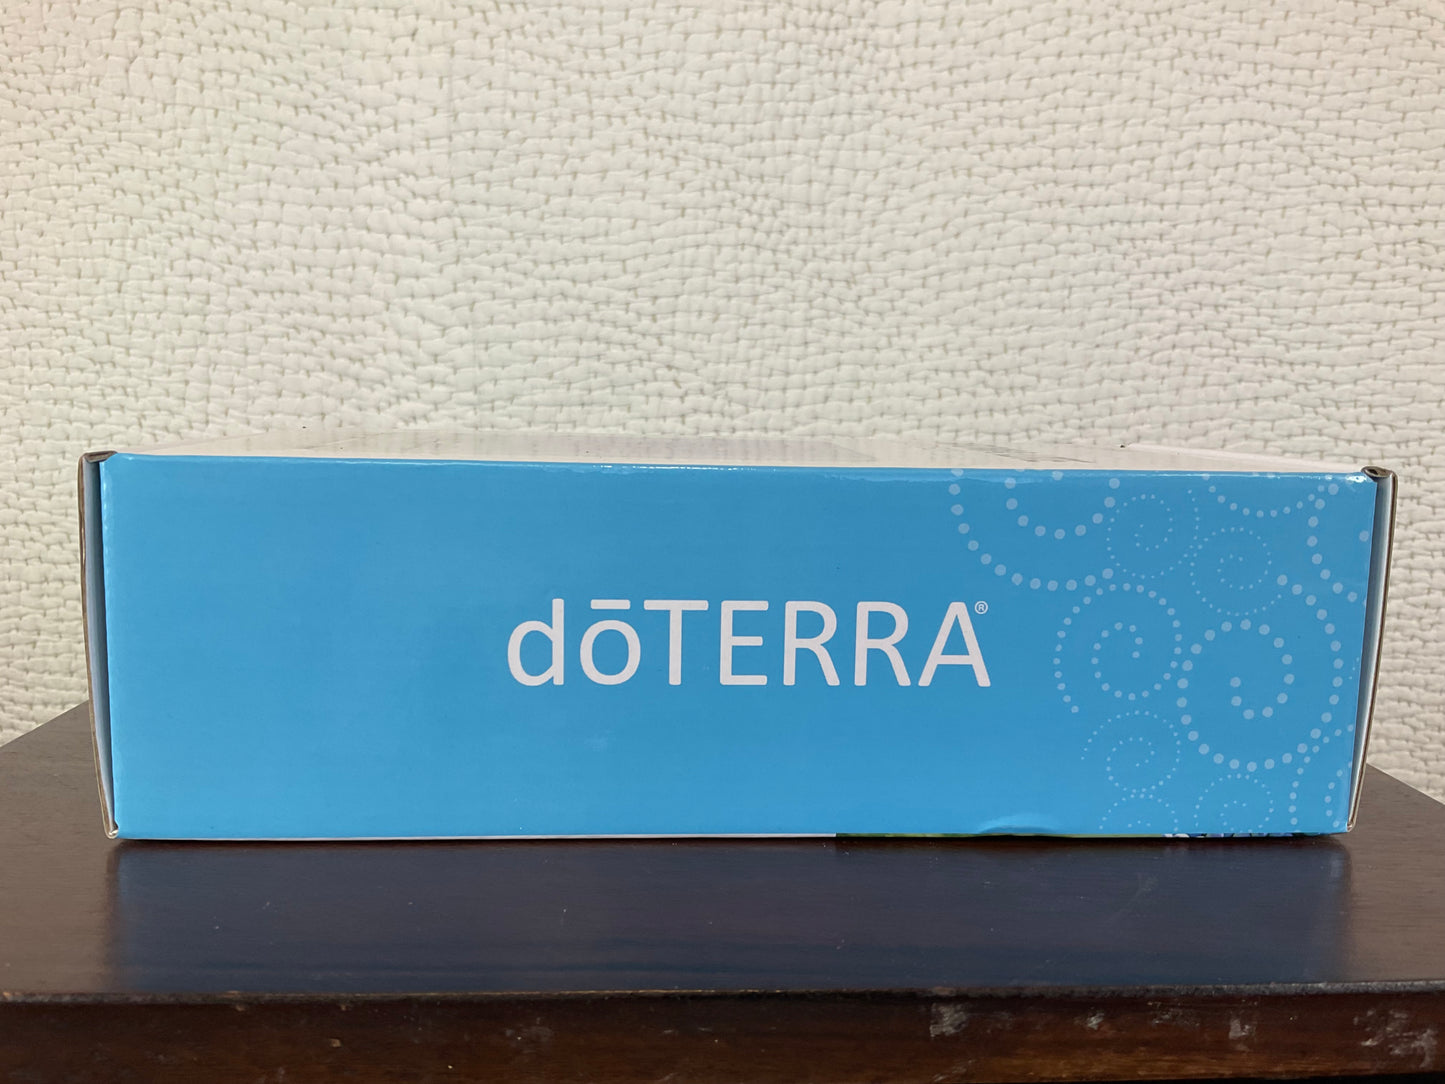 Doterra Aroma Lite Diffuser, Oils Not Included